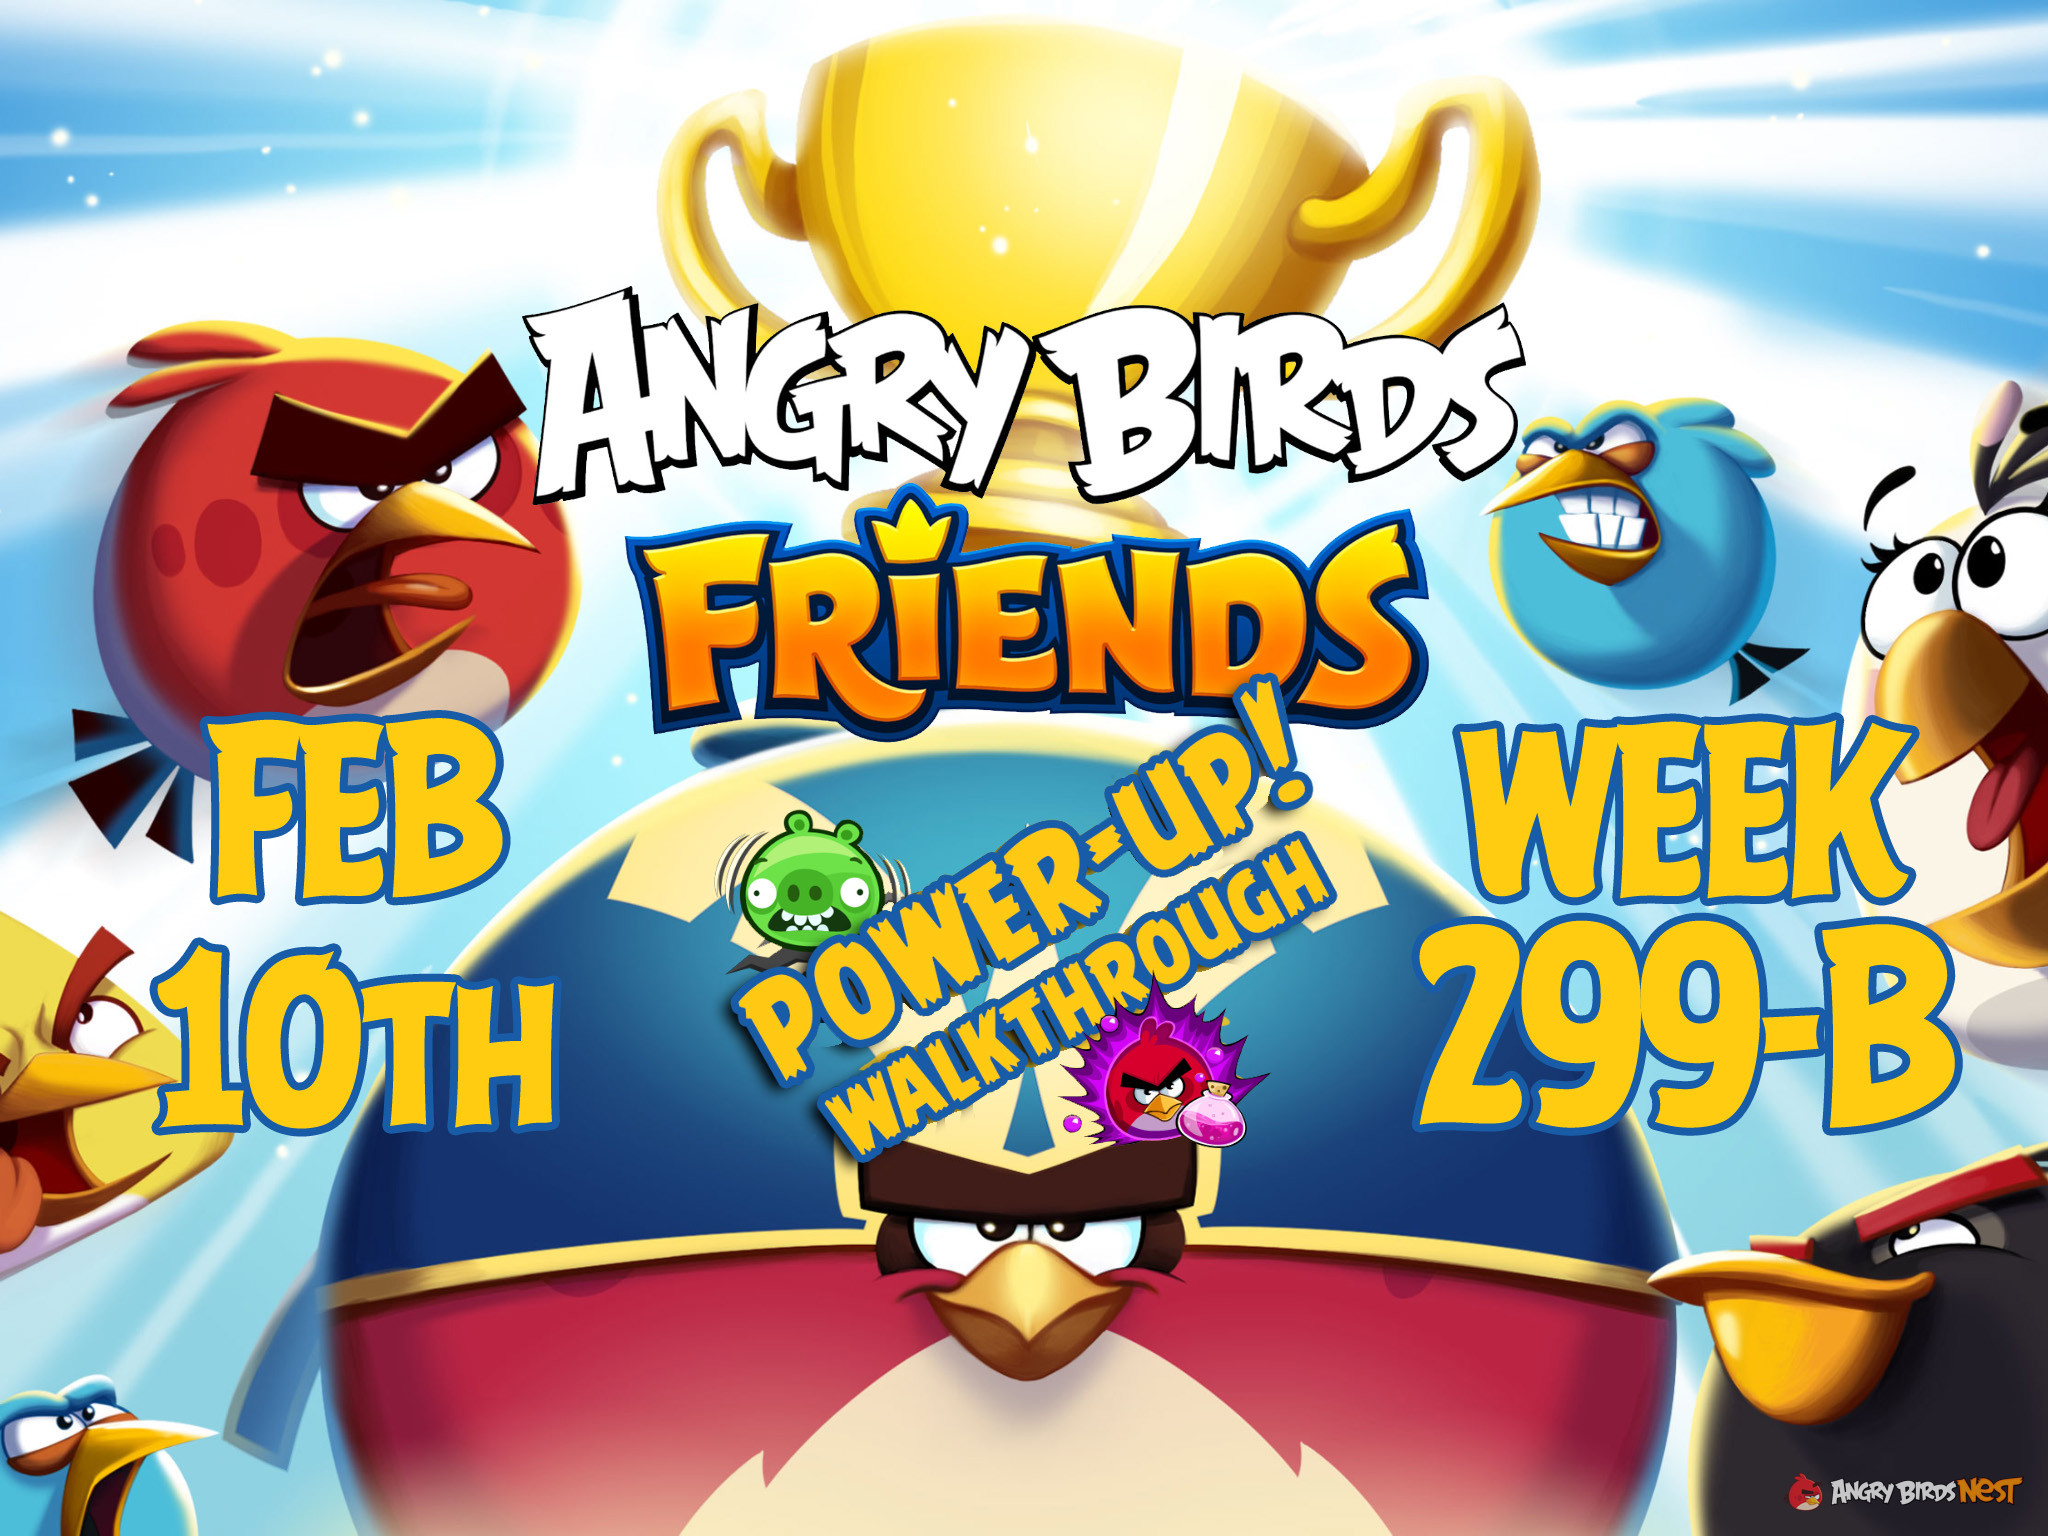 Angry Birds Friends Tournament Week 299-B Feature Image PU